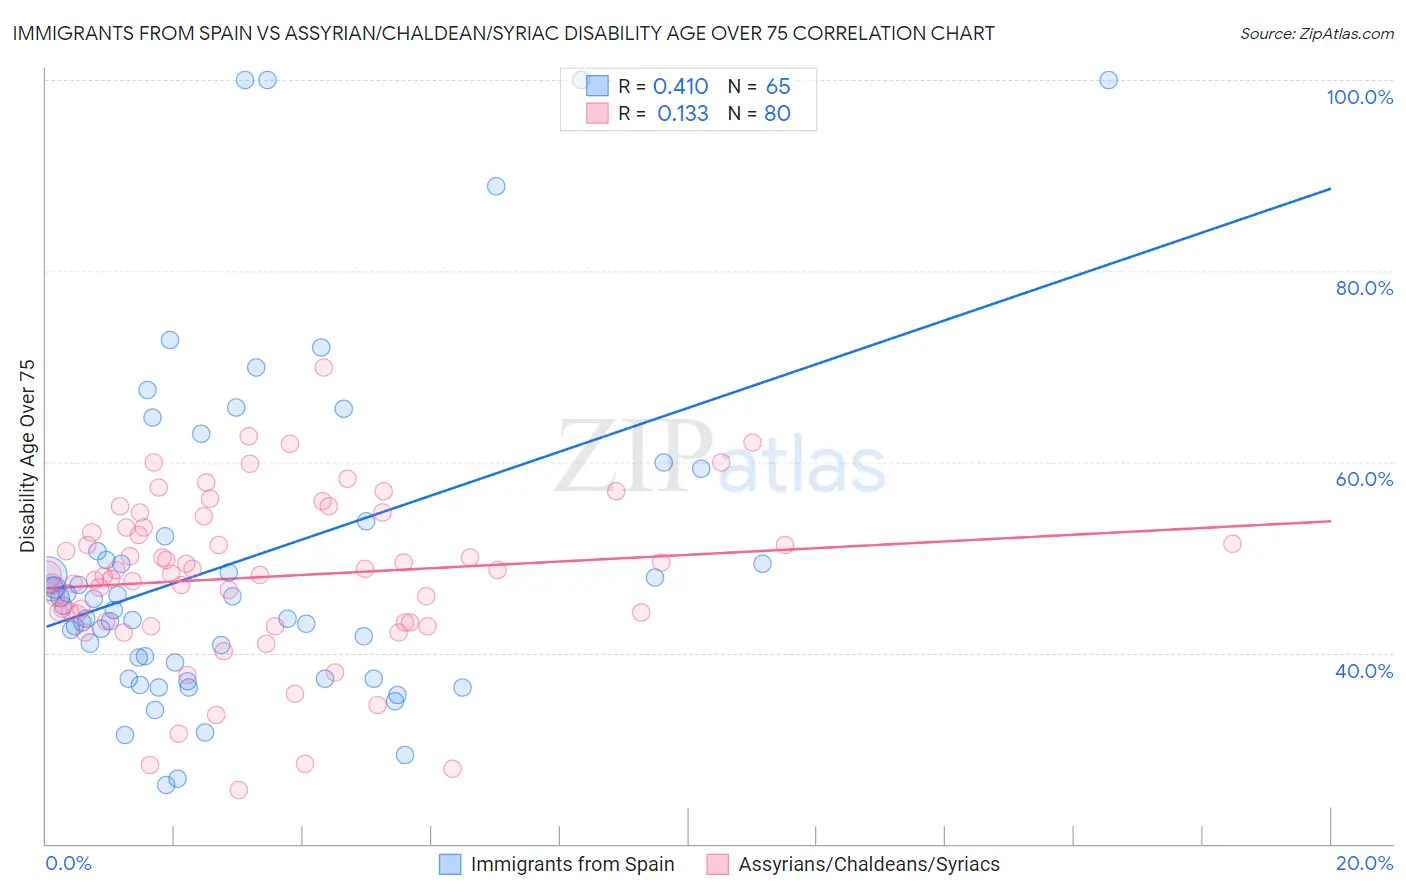 Immigrants from Spain vs Assyrian/Chaldean/Syriac Disability Age Over 75